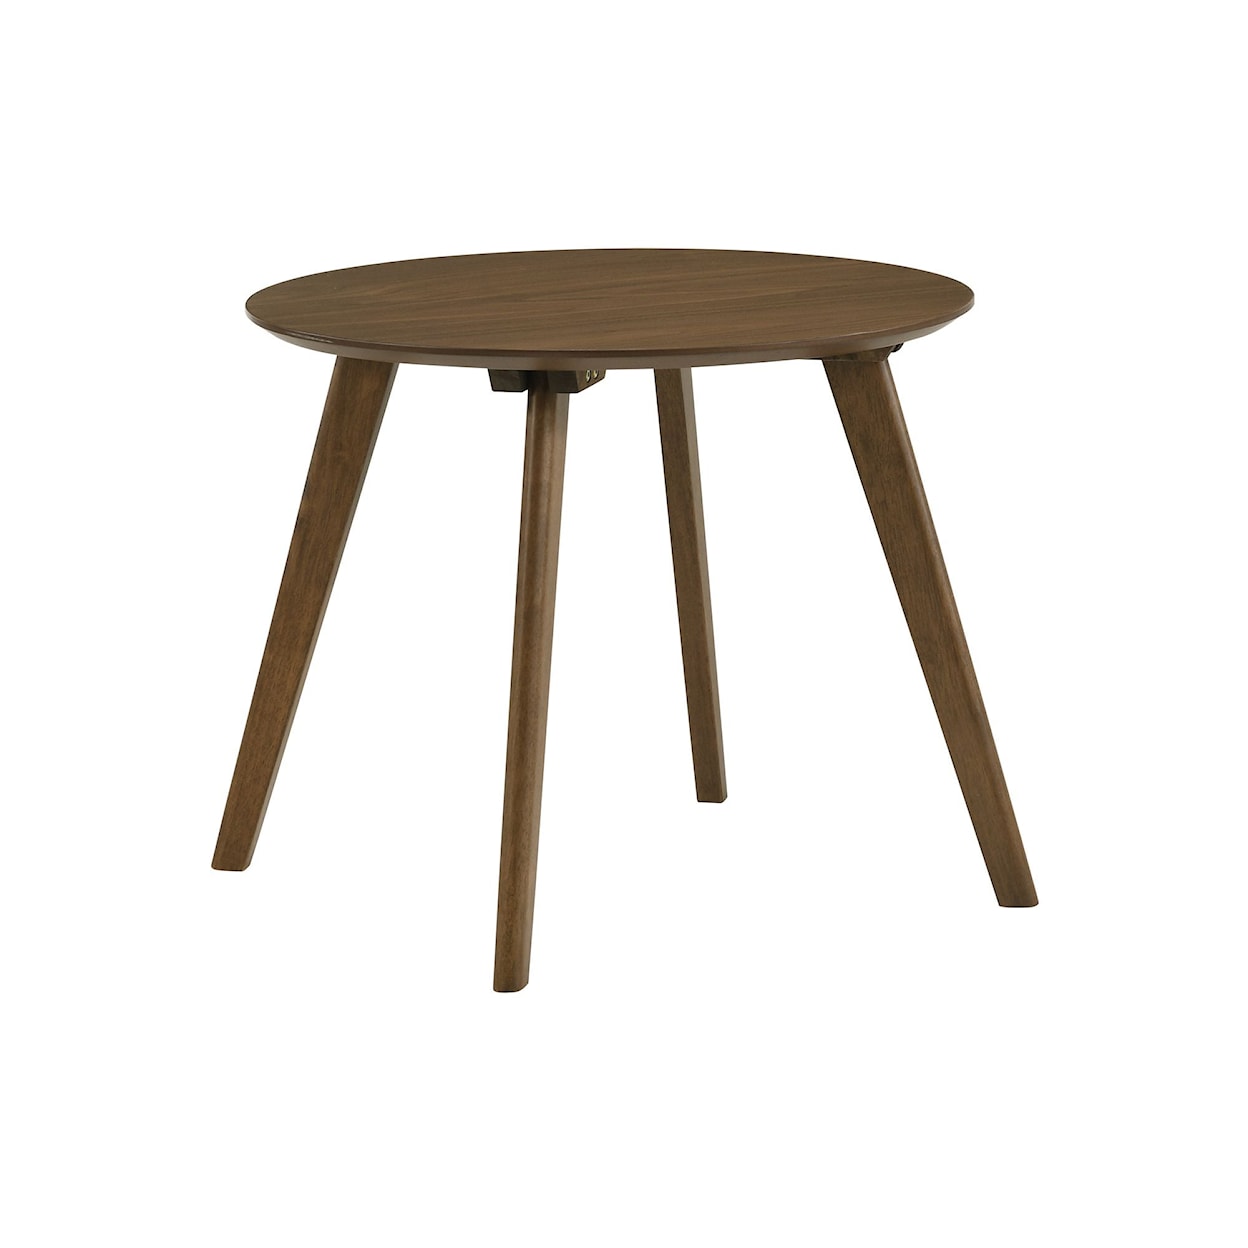 Elements International Rendall RENDALL END TABLE |